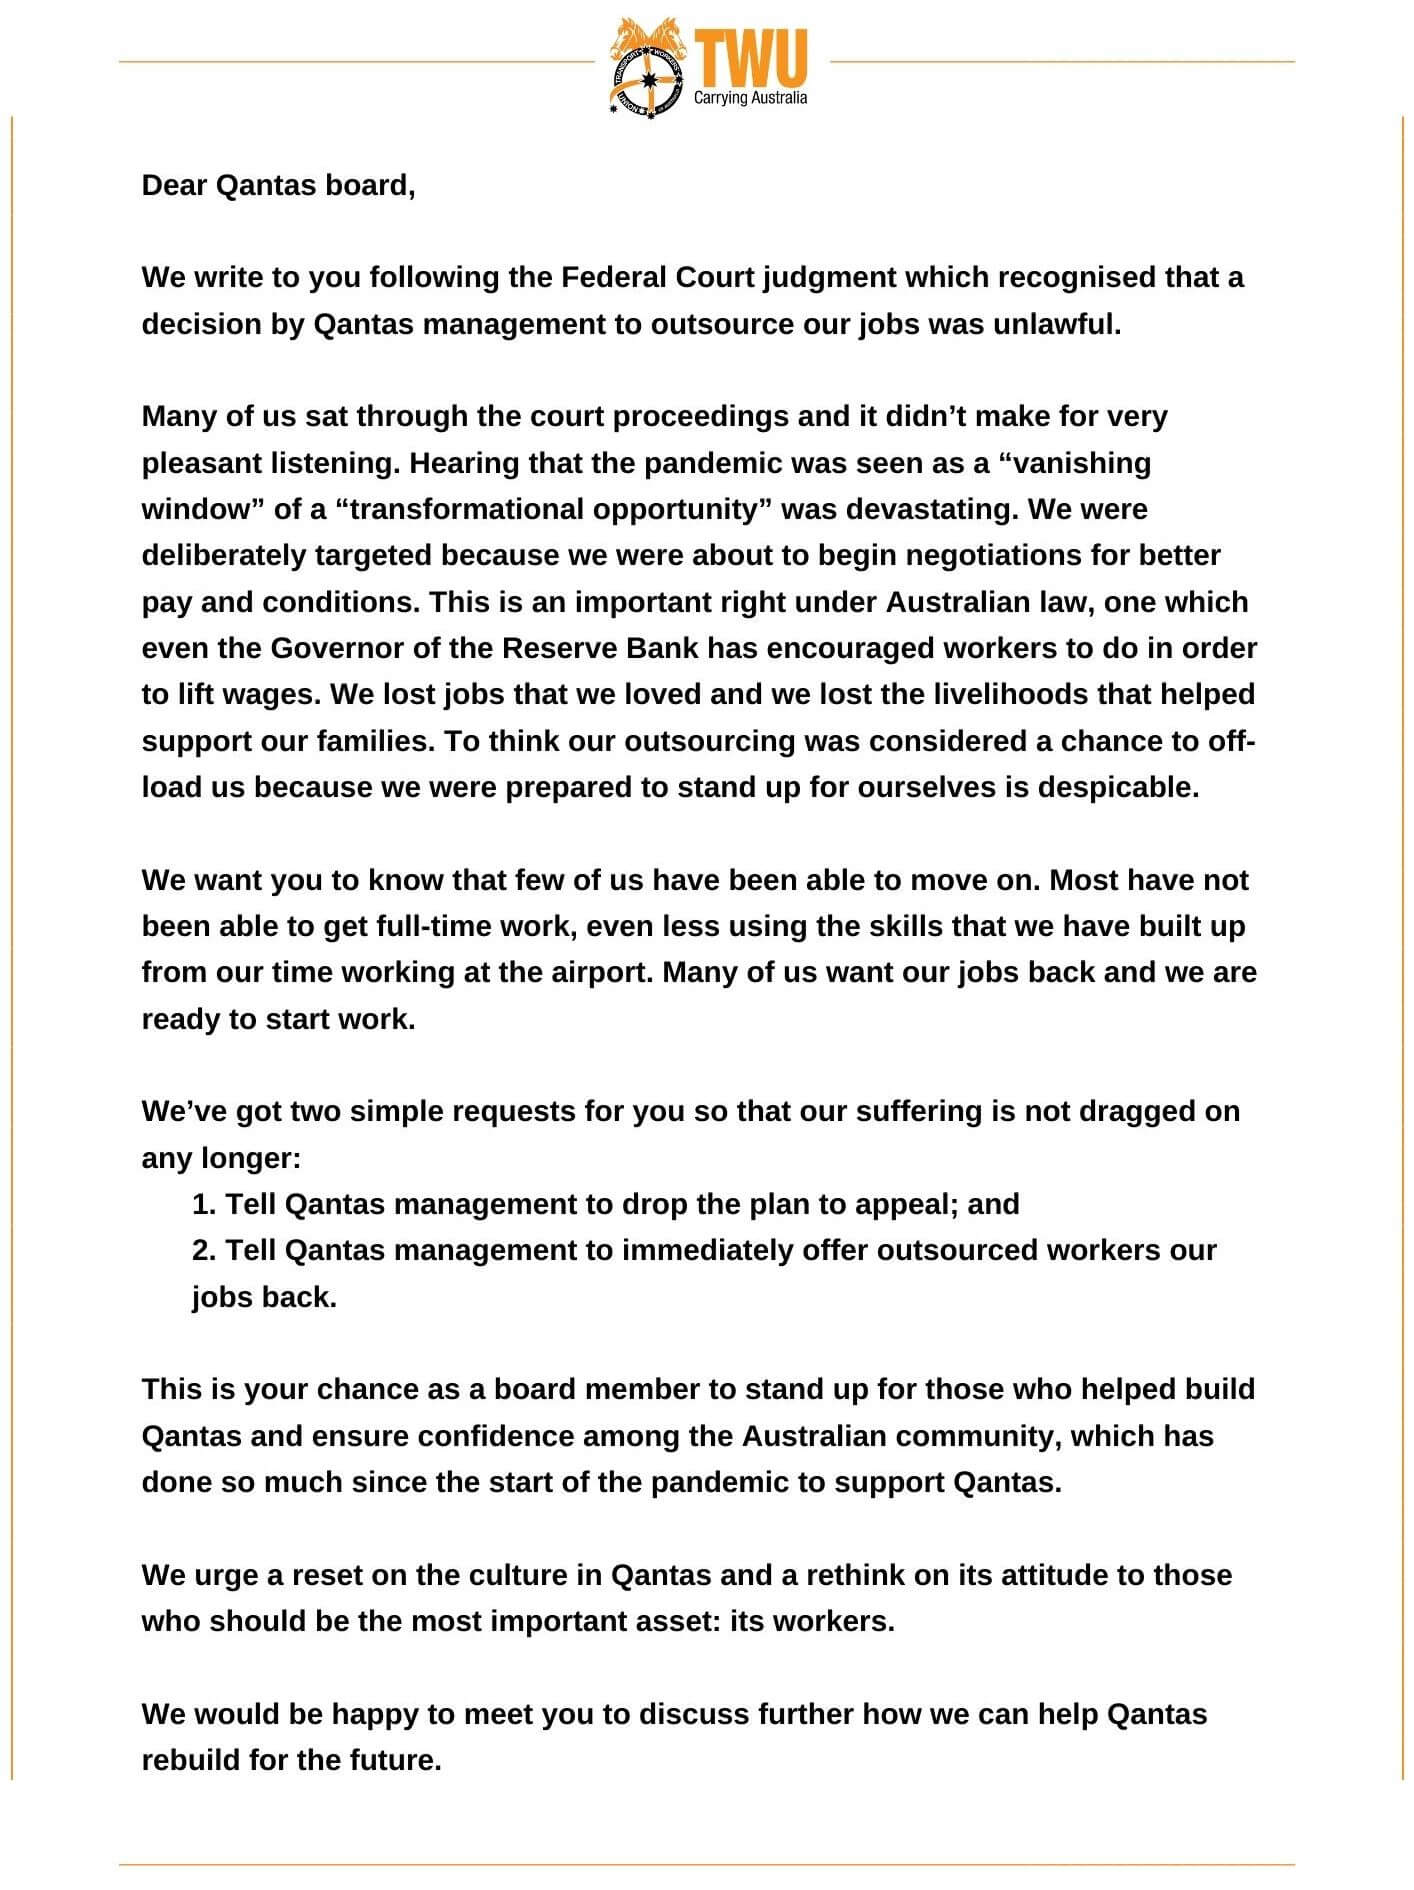 Letter to Qantas Board calling for them to drop plans for appeal and offer illegally sacked workers their jobs back